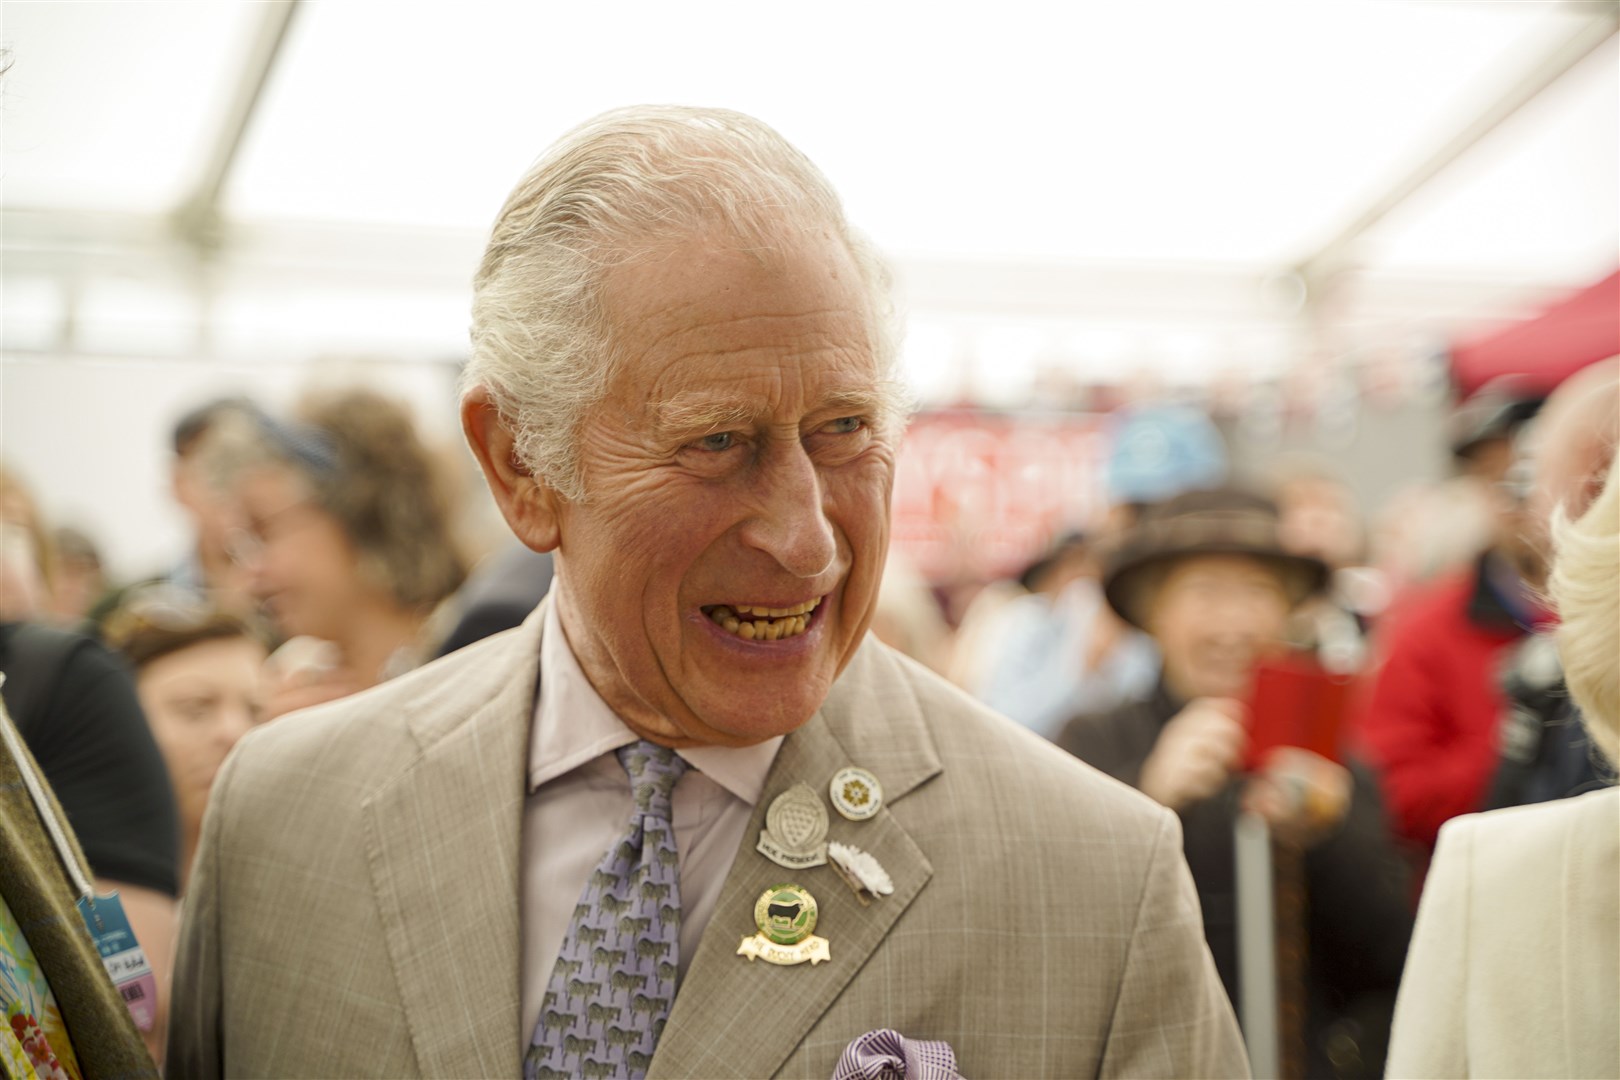 The Prince of Wales has reportedly made private comments criticising the policy (Hugh Hastings/PA)